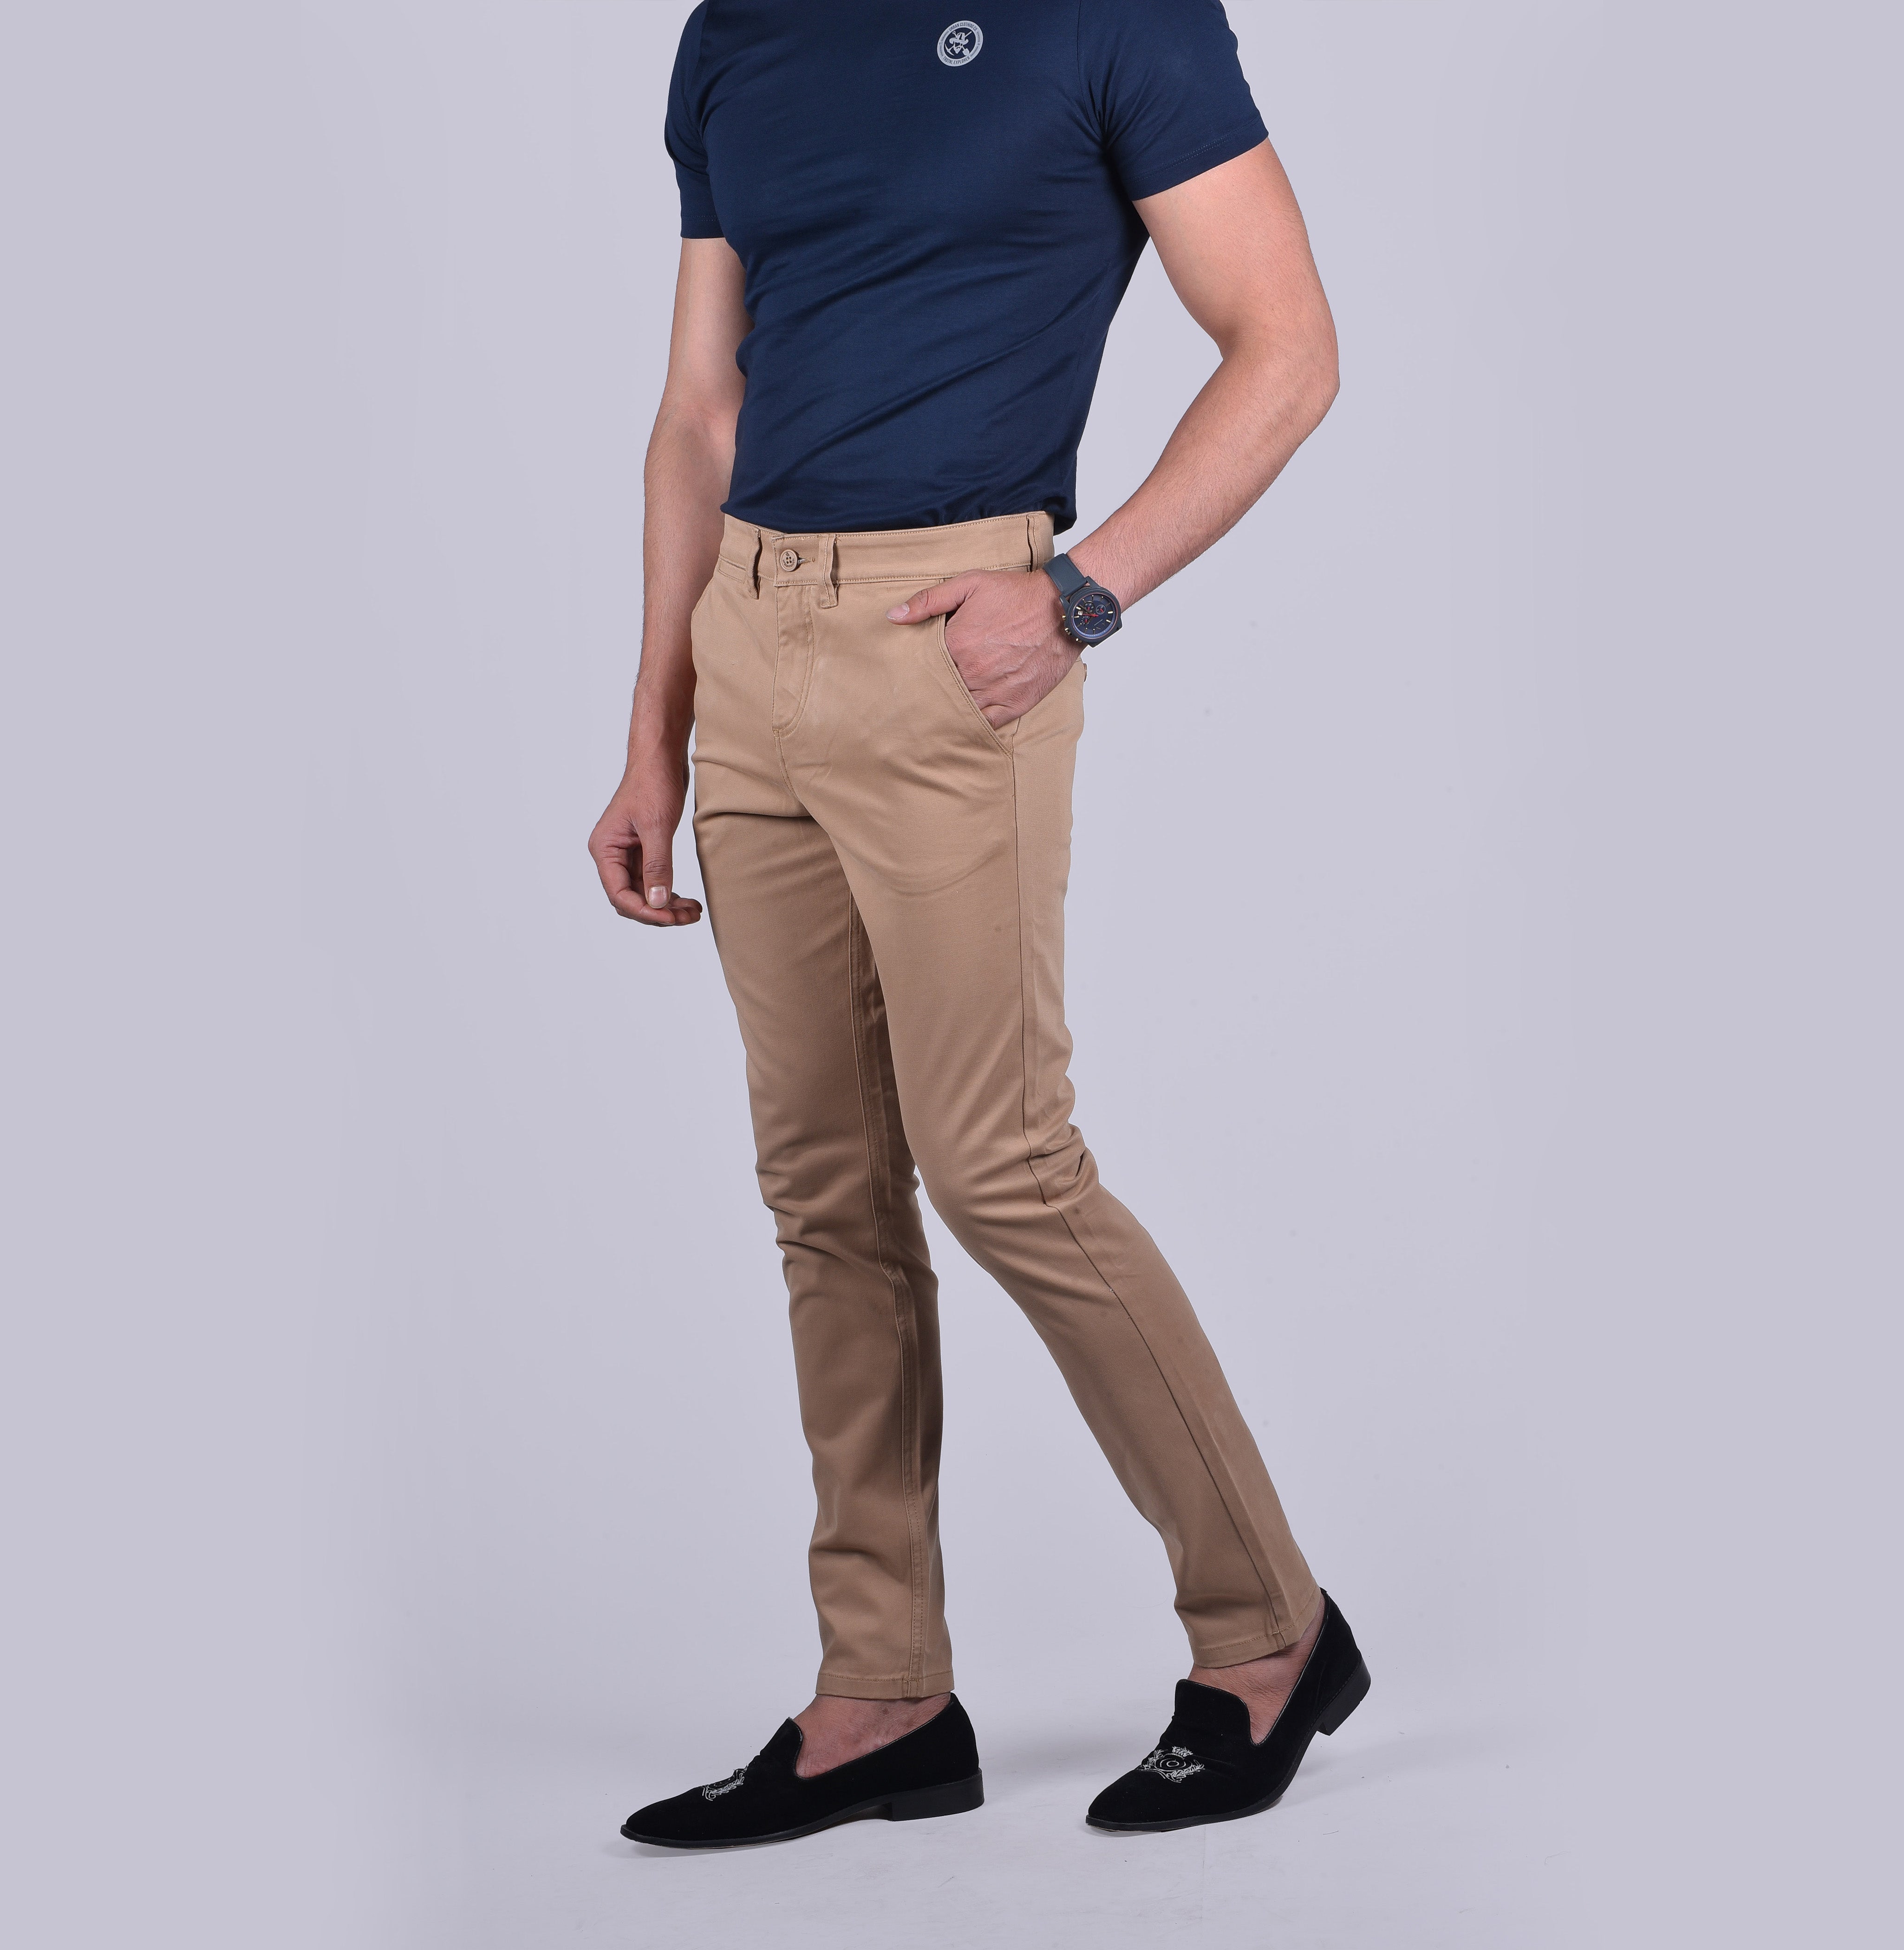 10 Awesome Khaki or Camel Color Shirt Matching Pants Ideas  TiptopGents